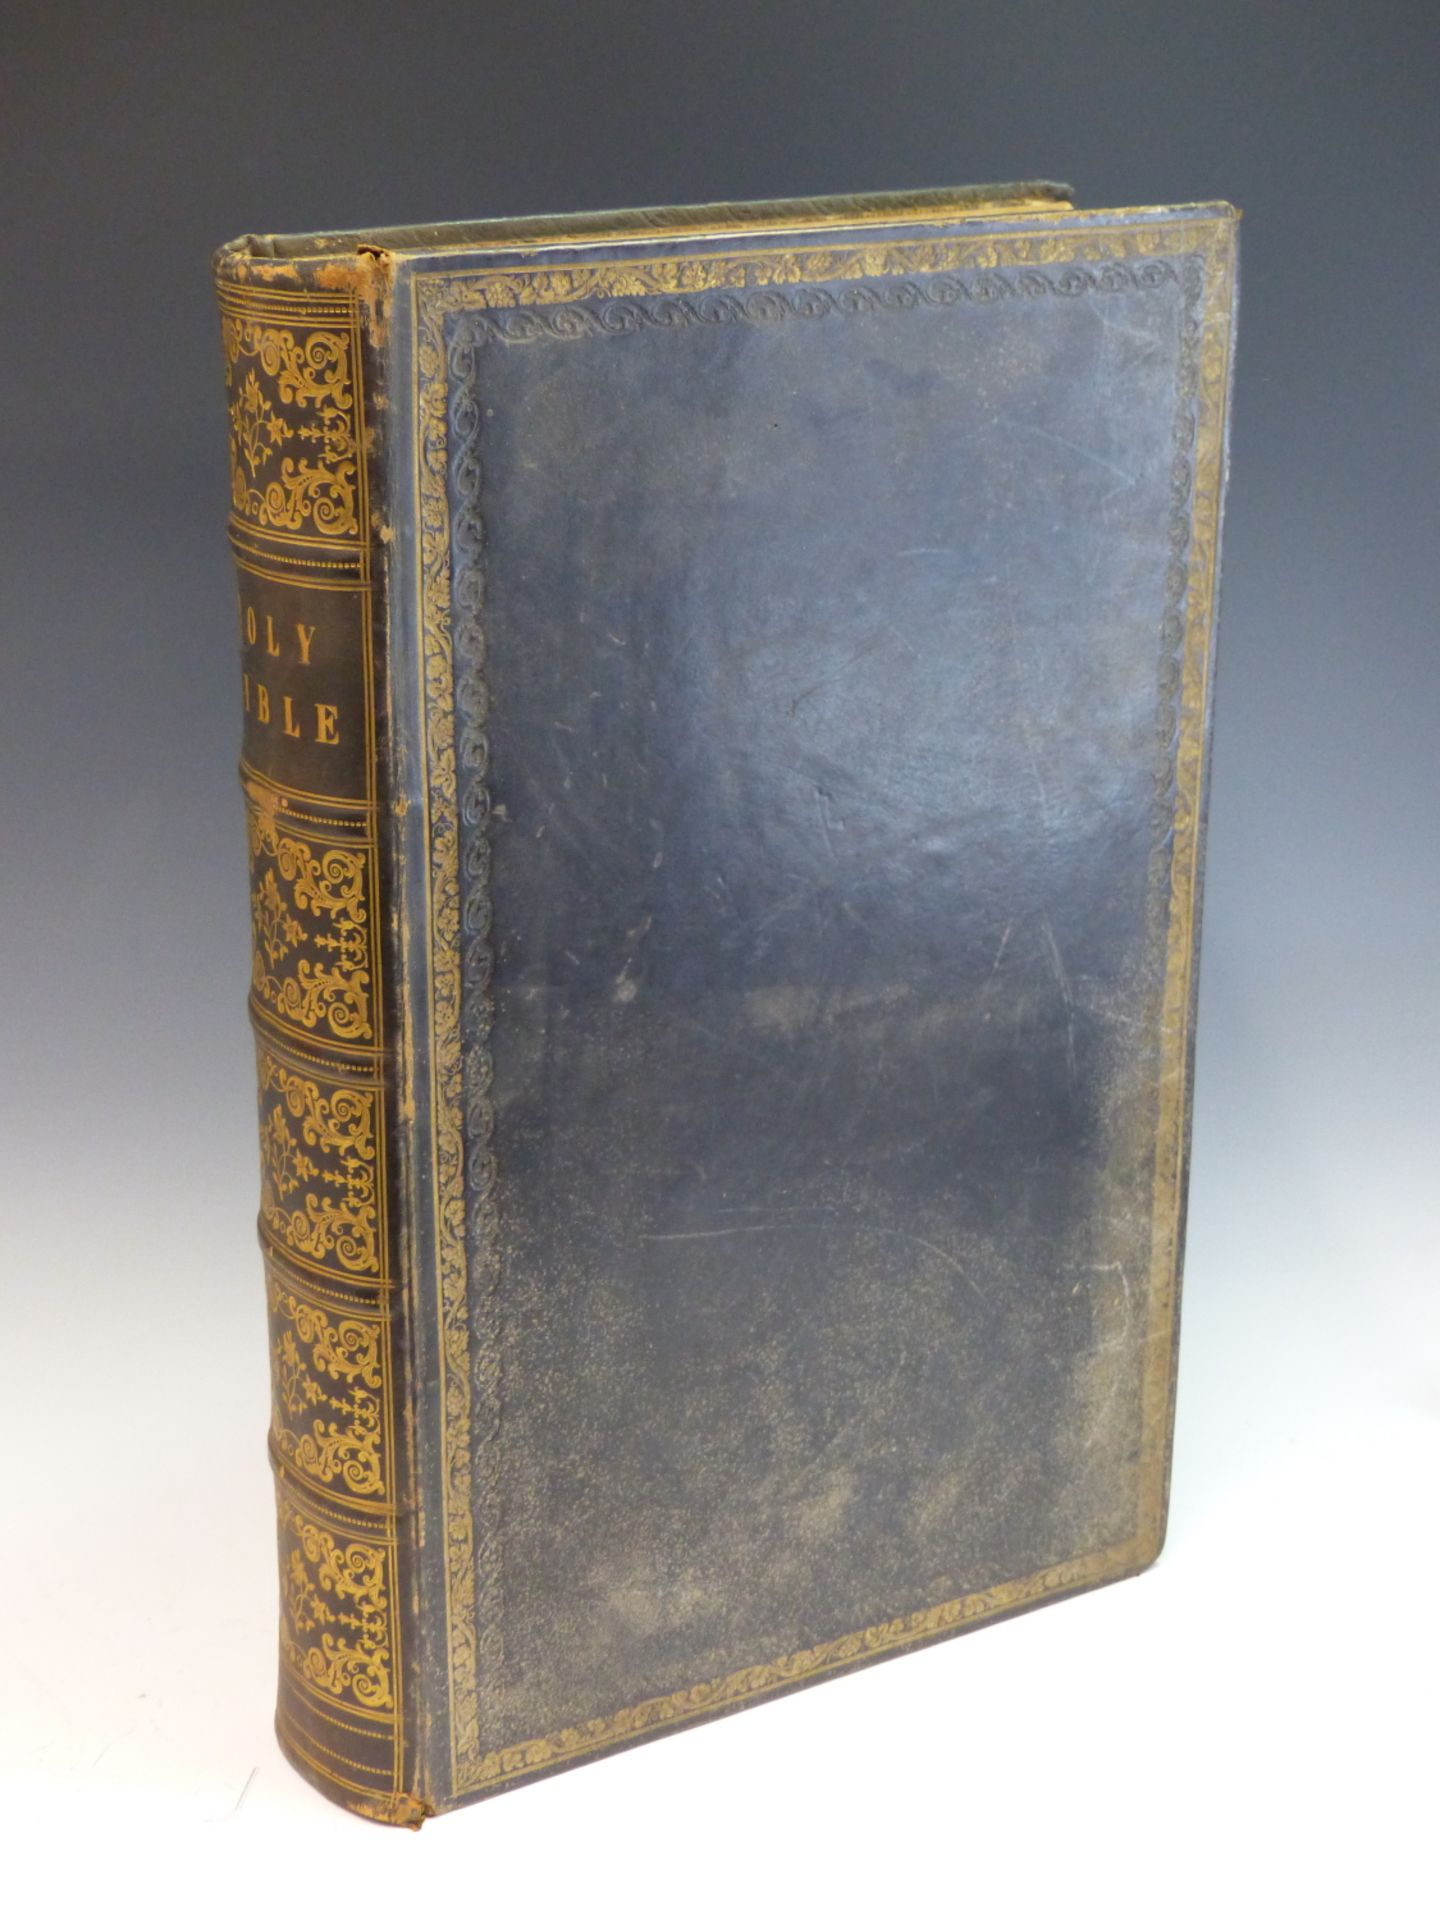 TWO ANTIQUE FAMILY BIBLES, ONE DATED 1819, THE SECOND WITH DECORATIVE EMBOSSED BINDING AND BRASS - Image 2 of 8